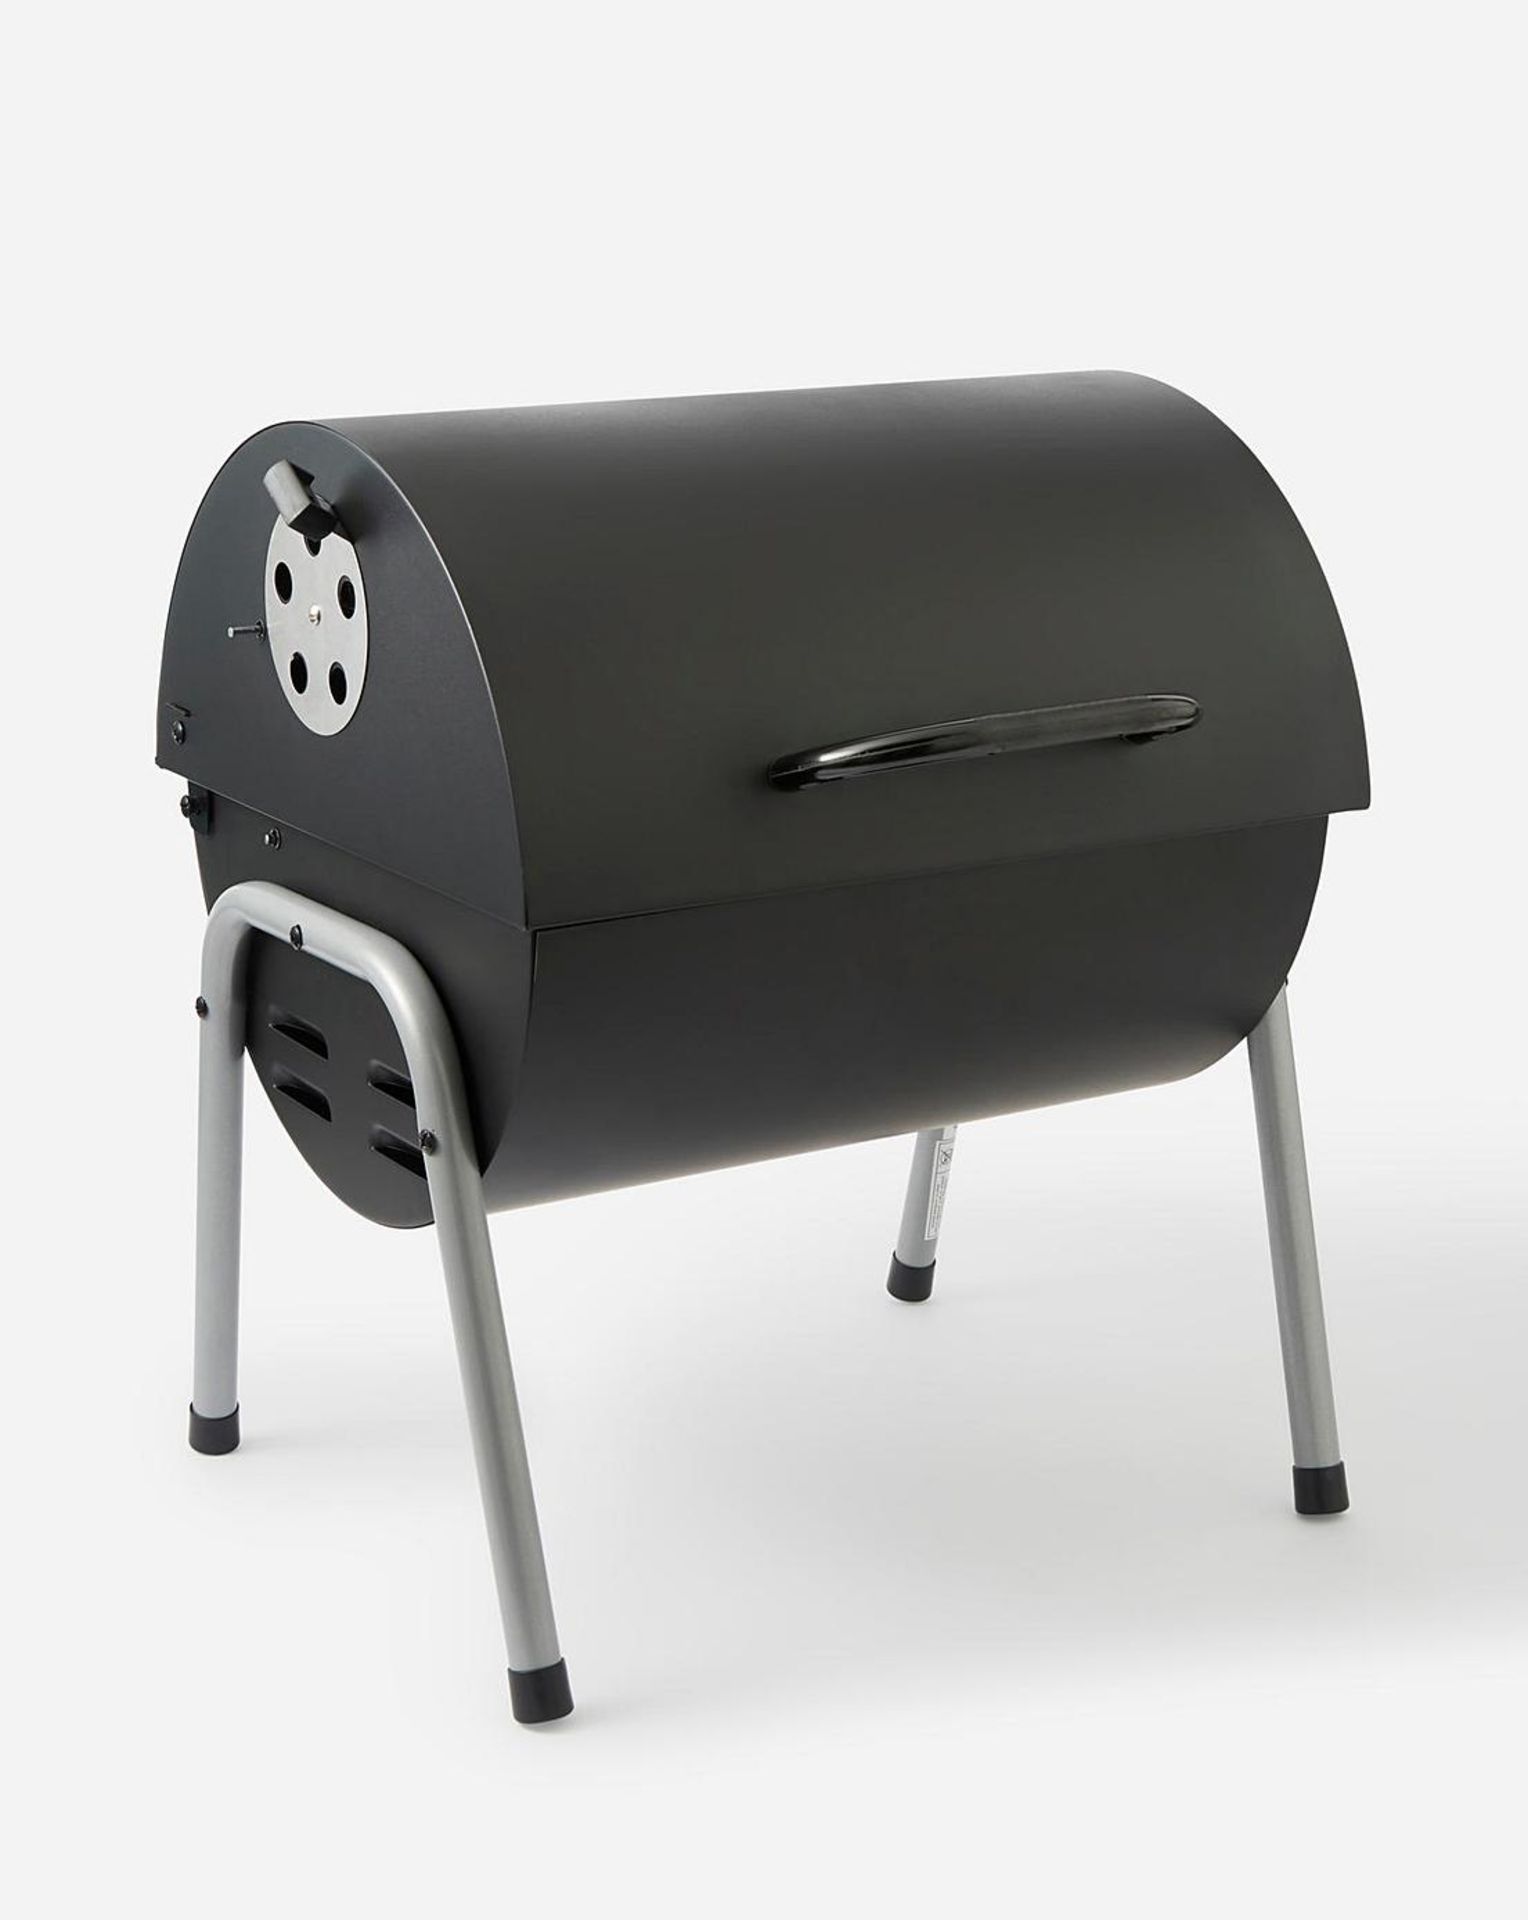 BRAND NEW CHARCOAL OIL DRUM BBQ R15-7 - Image 3 of 4